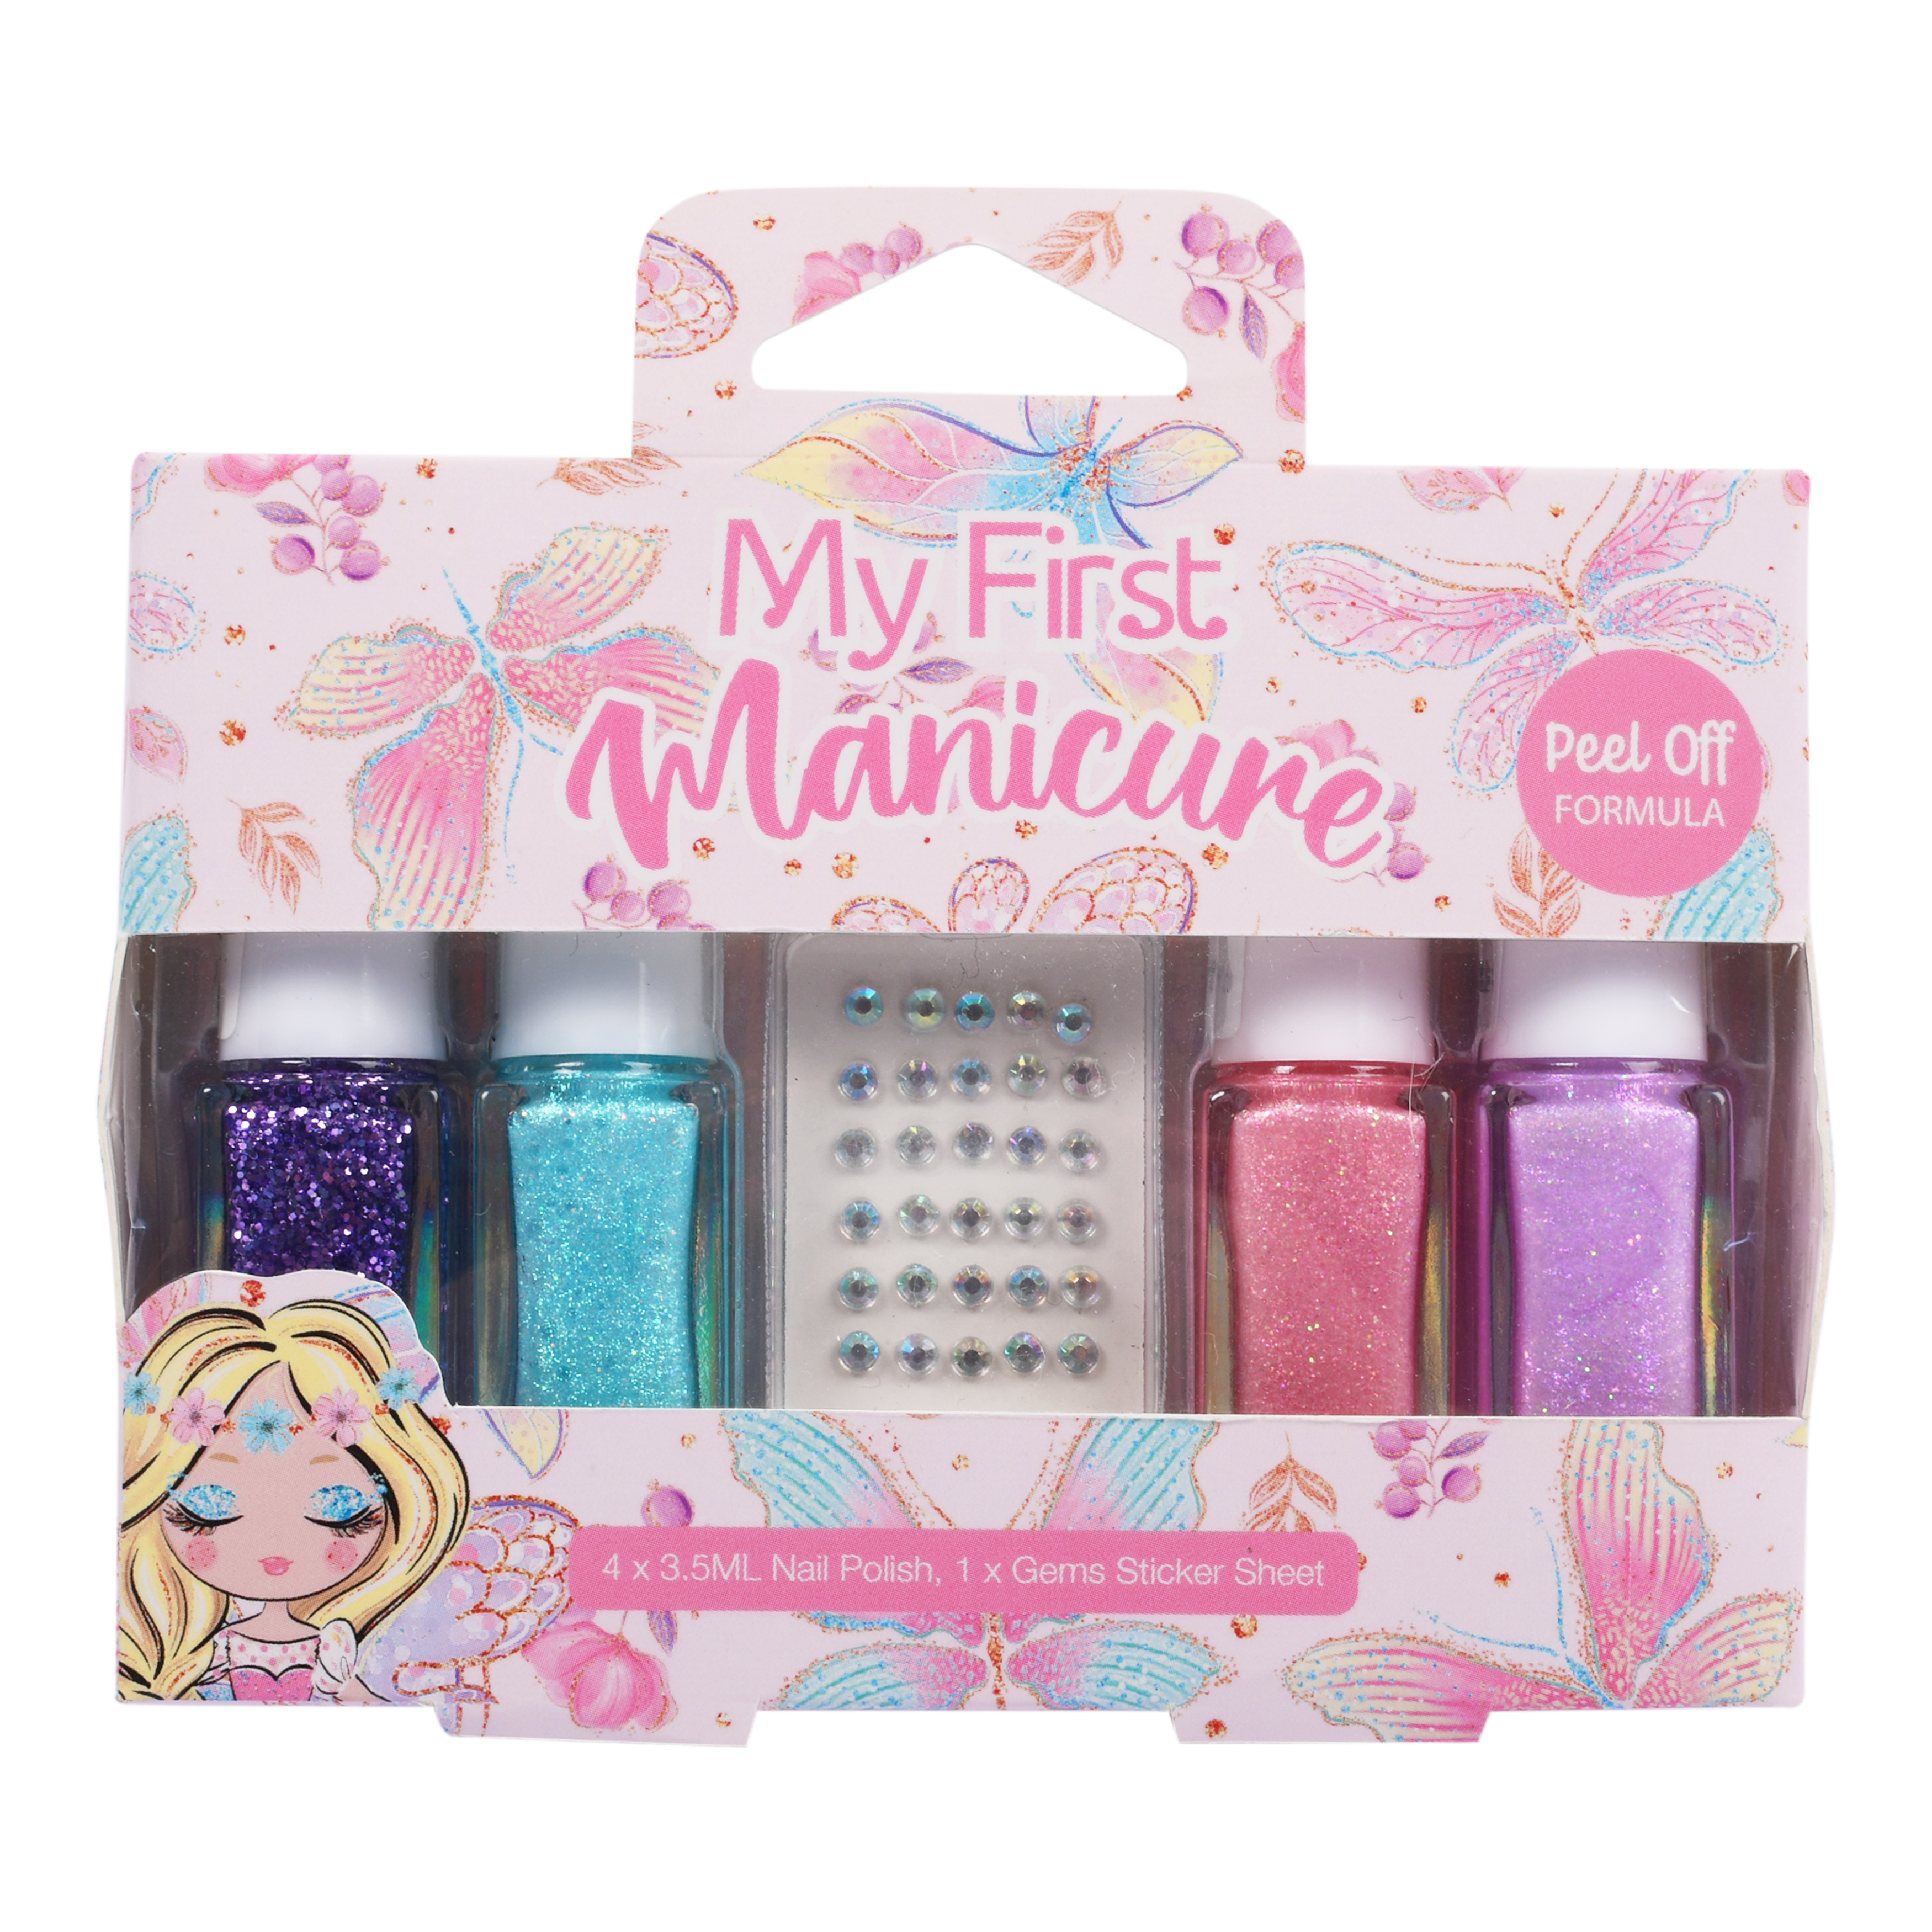 Fairy Friends - My First Manicure Kit - Dollars and Sense